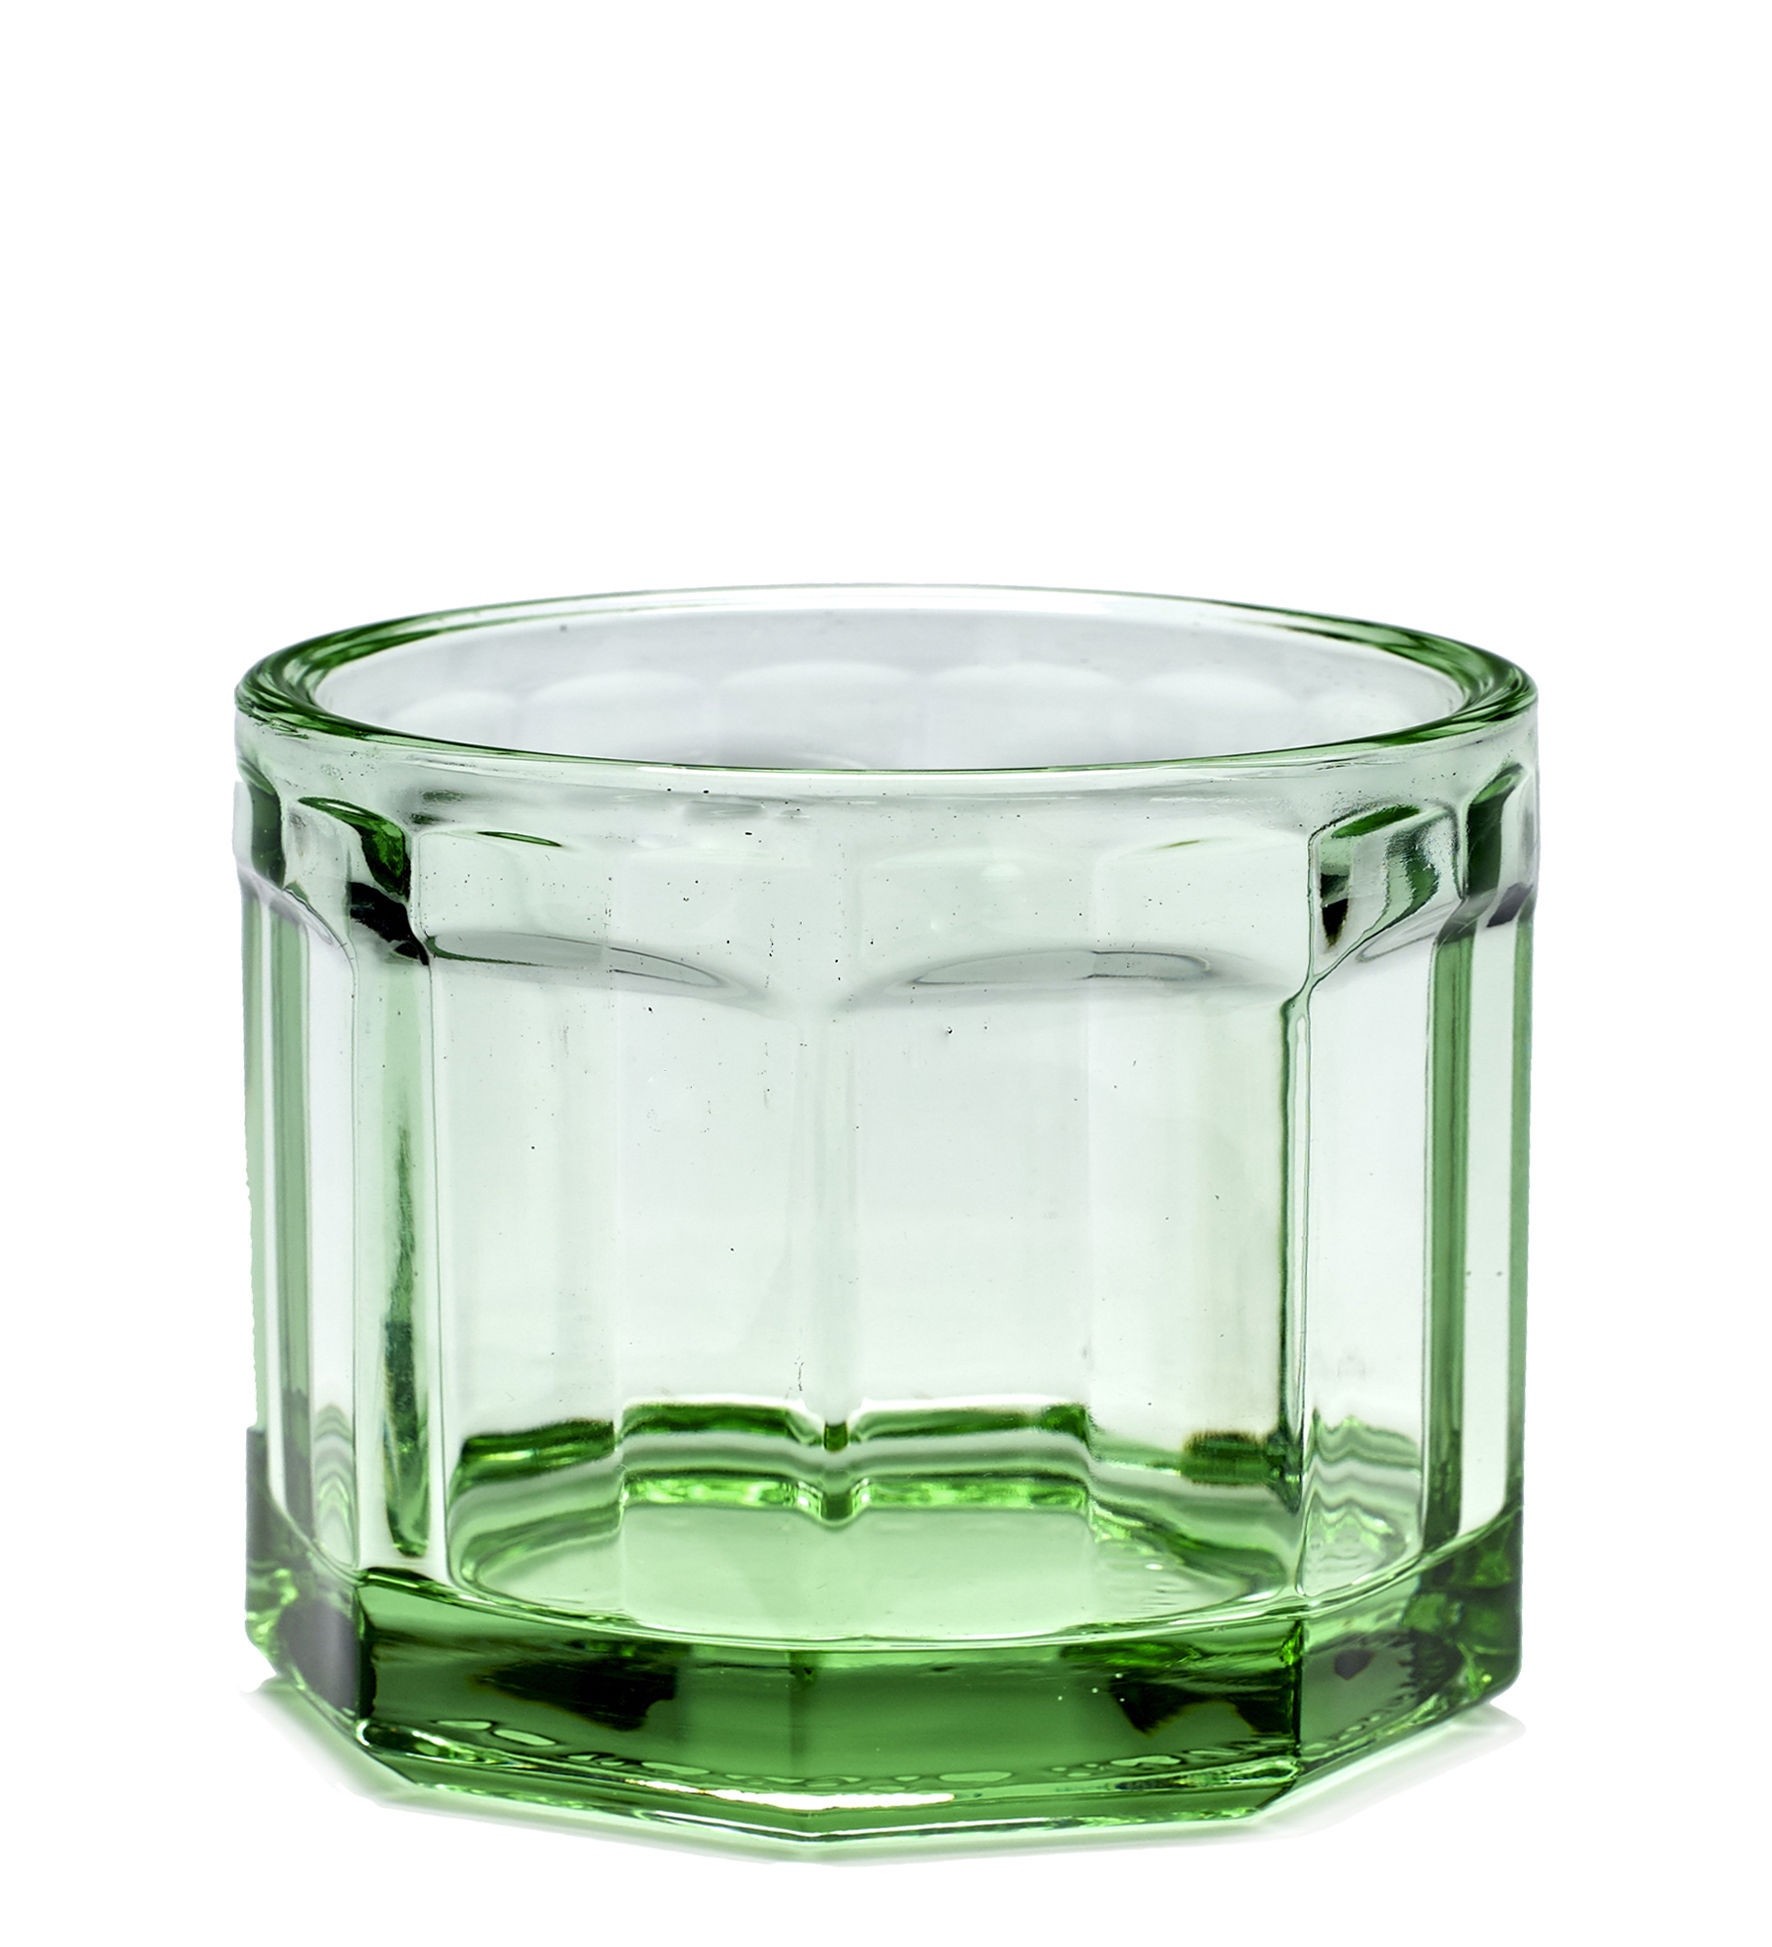 26 Wonderful 10 Fish Bowl Vase 2024 free download 10 fish bowl vase of fish fish small glass 16 cl transparent green by serax made in intended for fish fish small glass 16 cl transparent green by serax made in design uk